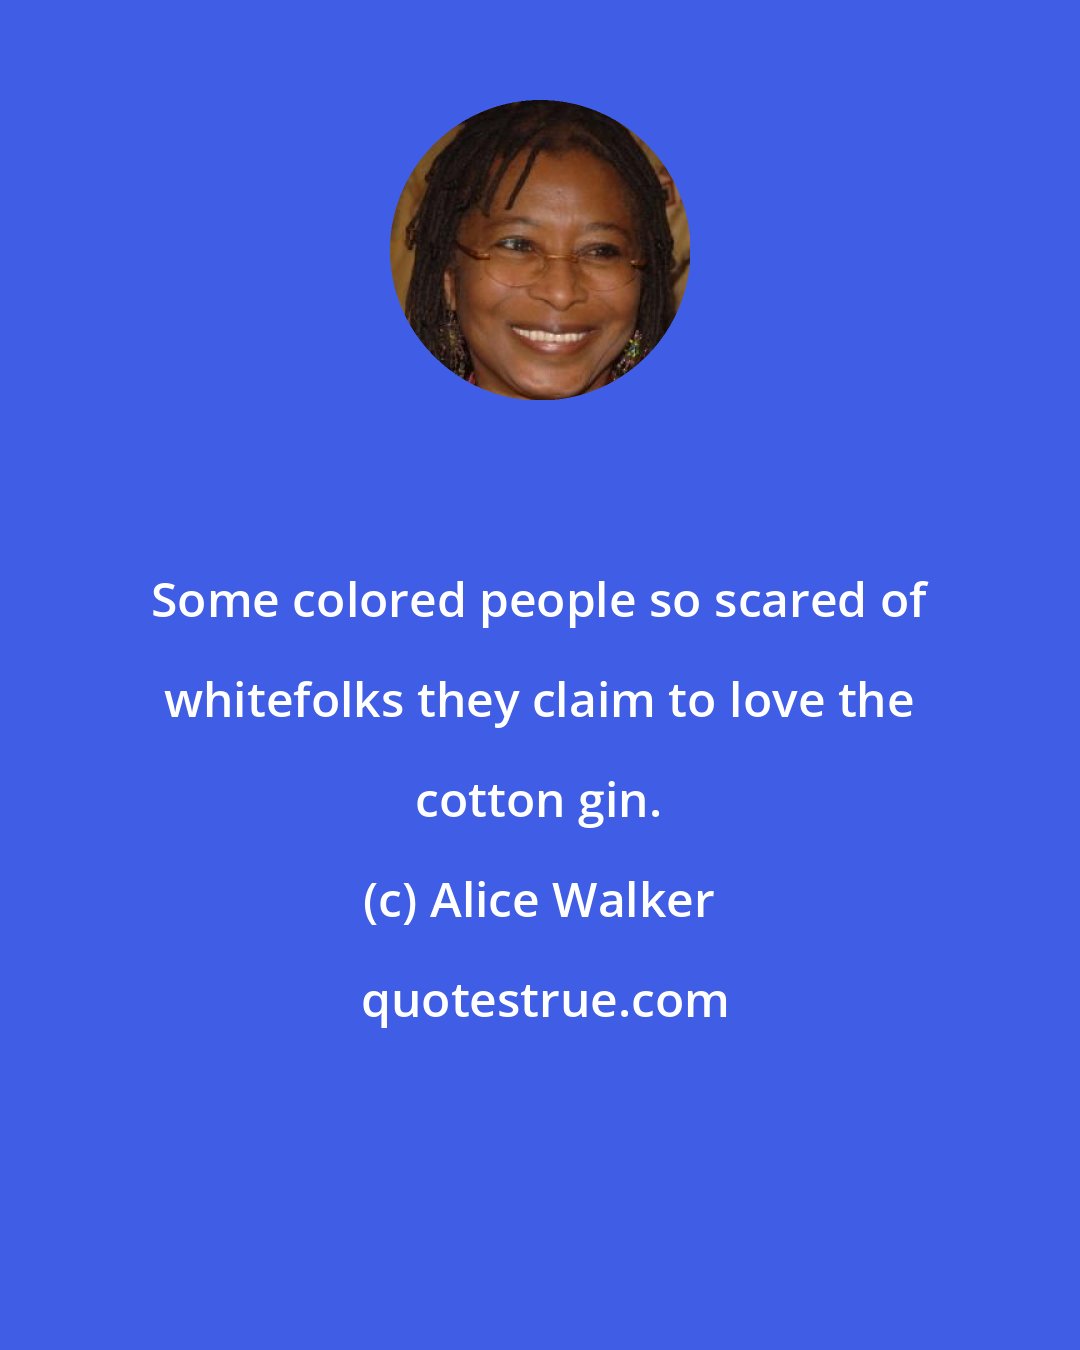 Alice Walker: Some colored people so scared of whitefolks they claim to love the cotton gin.